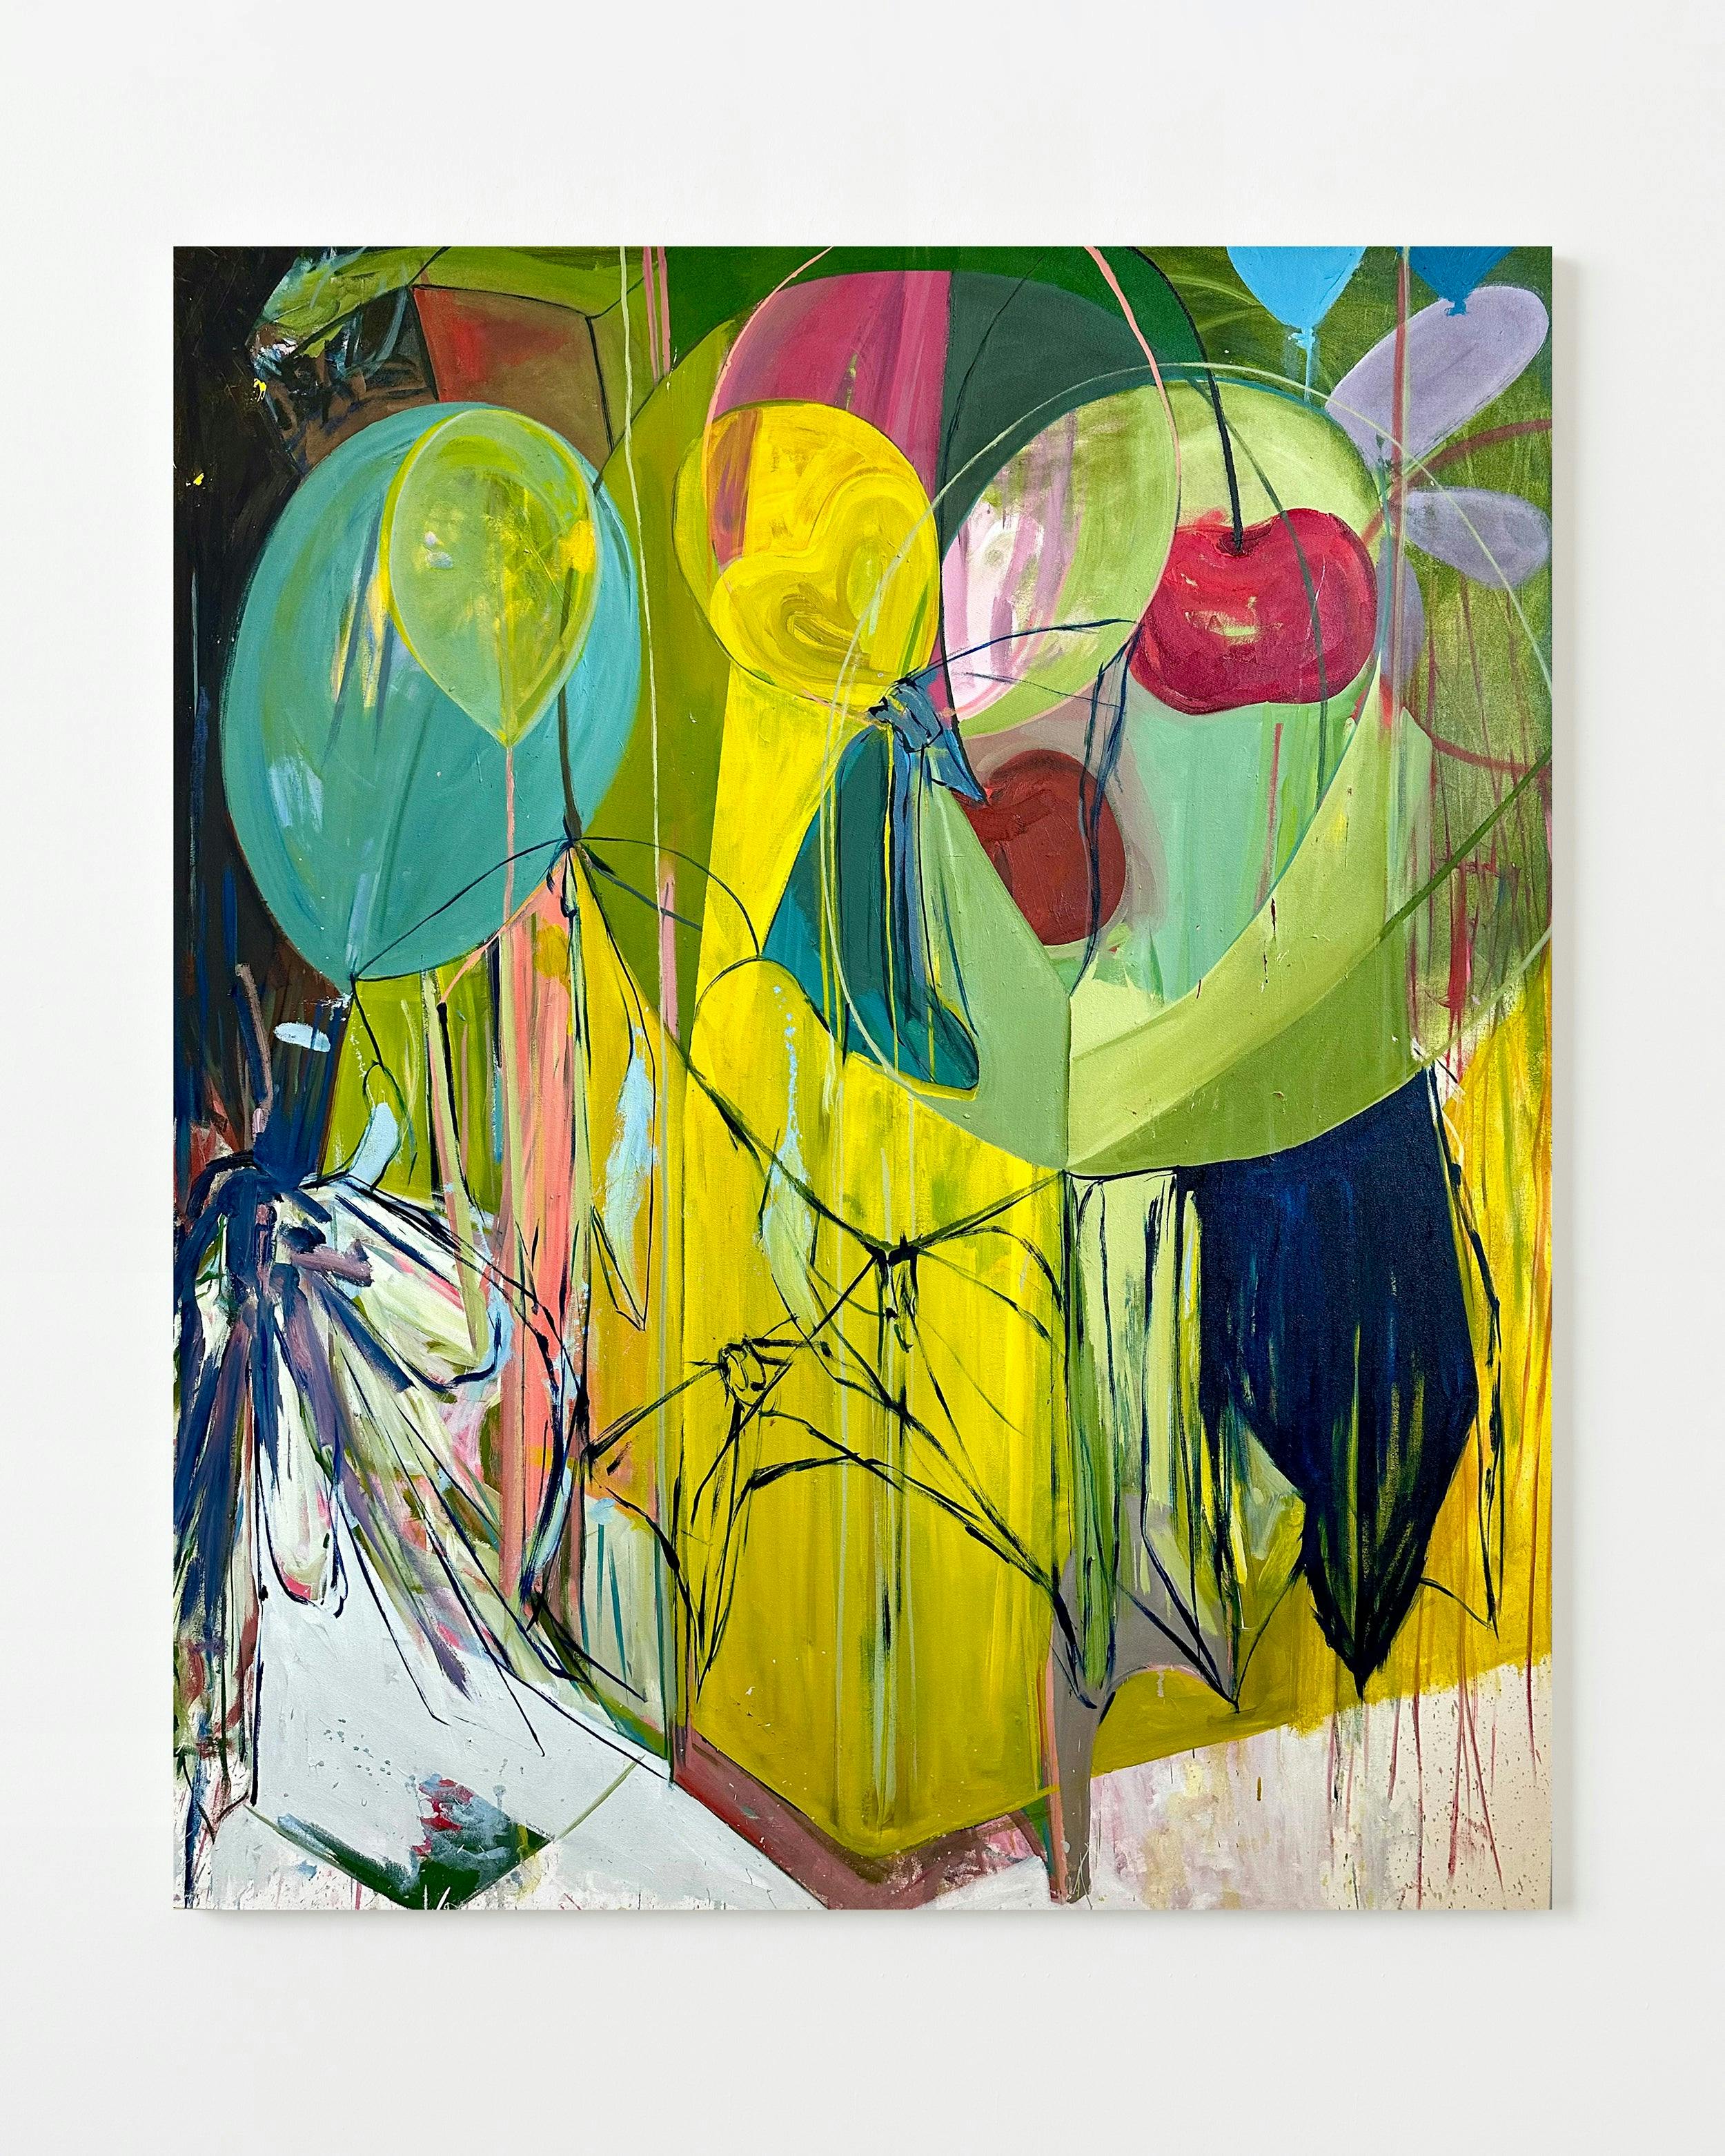 Painting by Diana Delgado titled "Balloons, Bows and Cherries (Yellow Corner)".